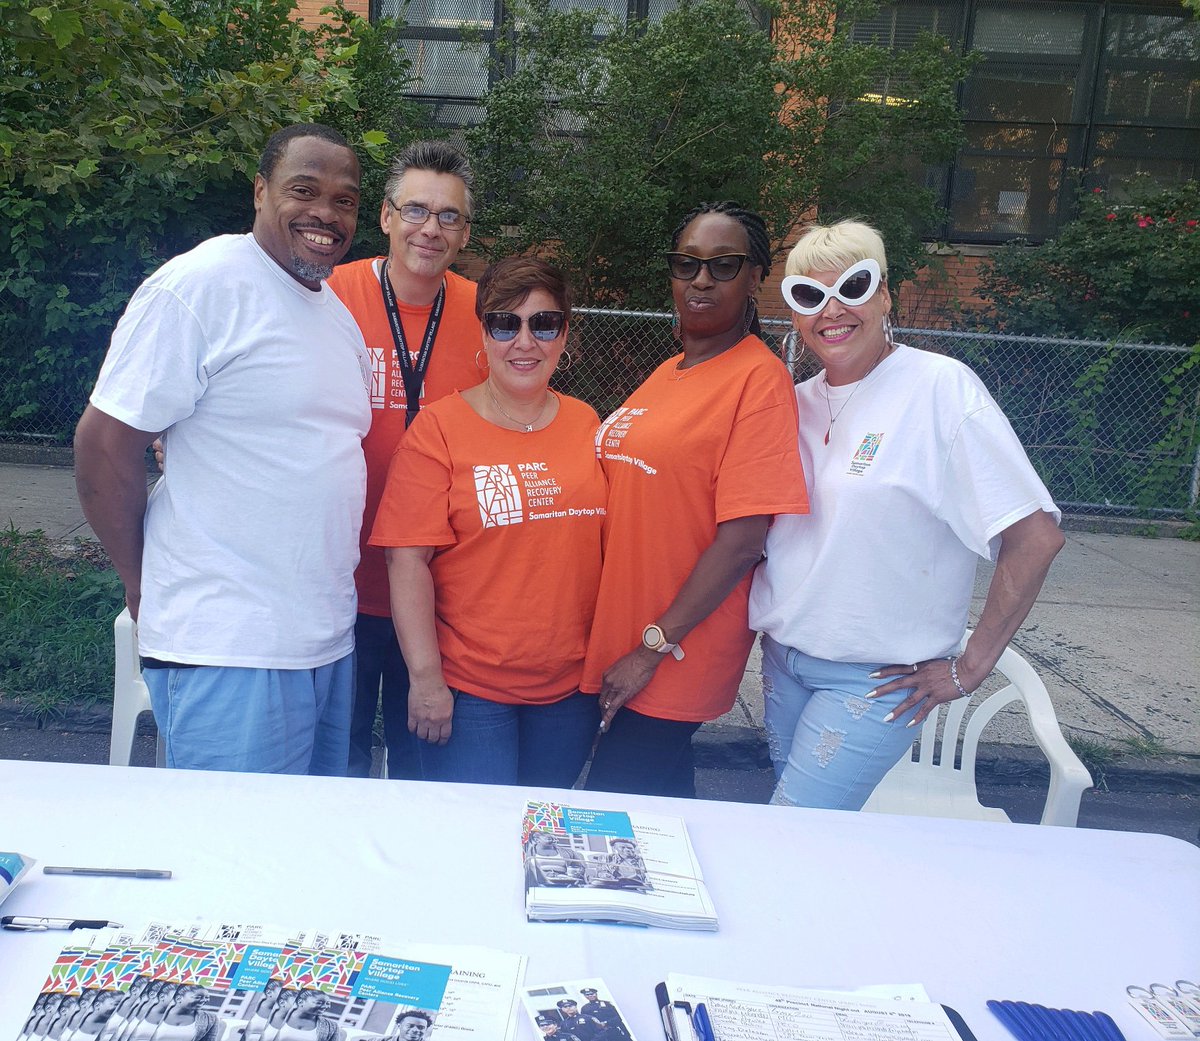 Flashback Friday! Last year our PARC Bronx team participated in  @NYPD48Pct Community Council's #NationalNightOut event. The quintet was promoting the upcoming grand opening of #PARCBronx at 368 E. 148th St. in #theBronx.  #recoveryfromaddiction #recoverycoach #peerservices